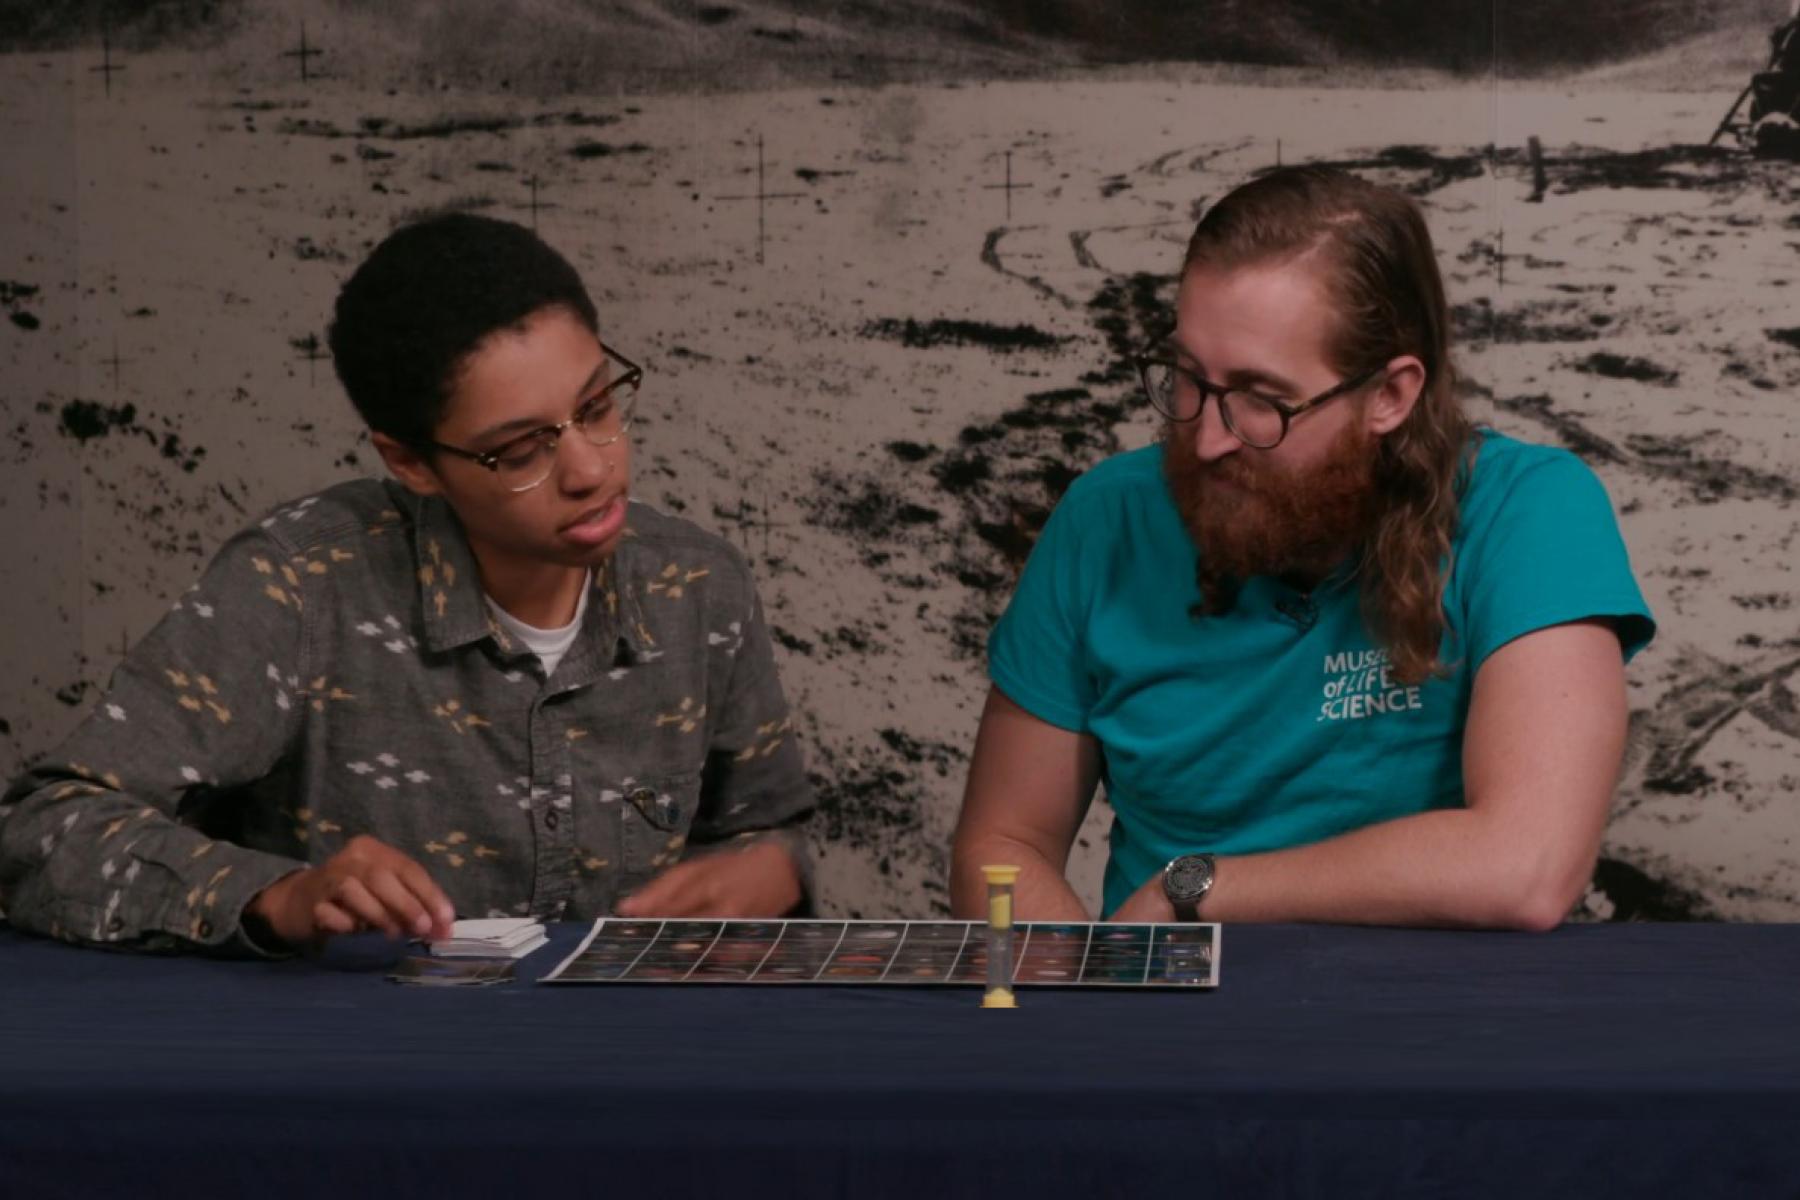 An adult and young adult sit at a table and play a science game